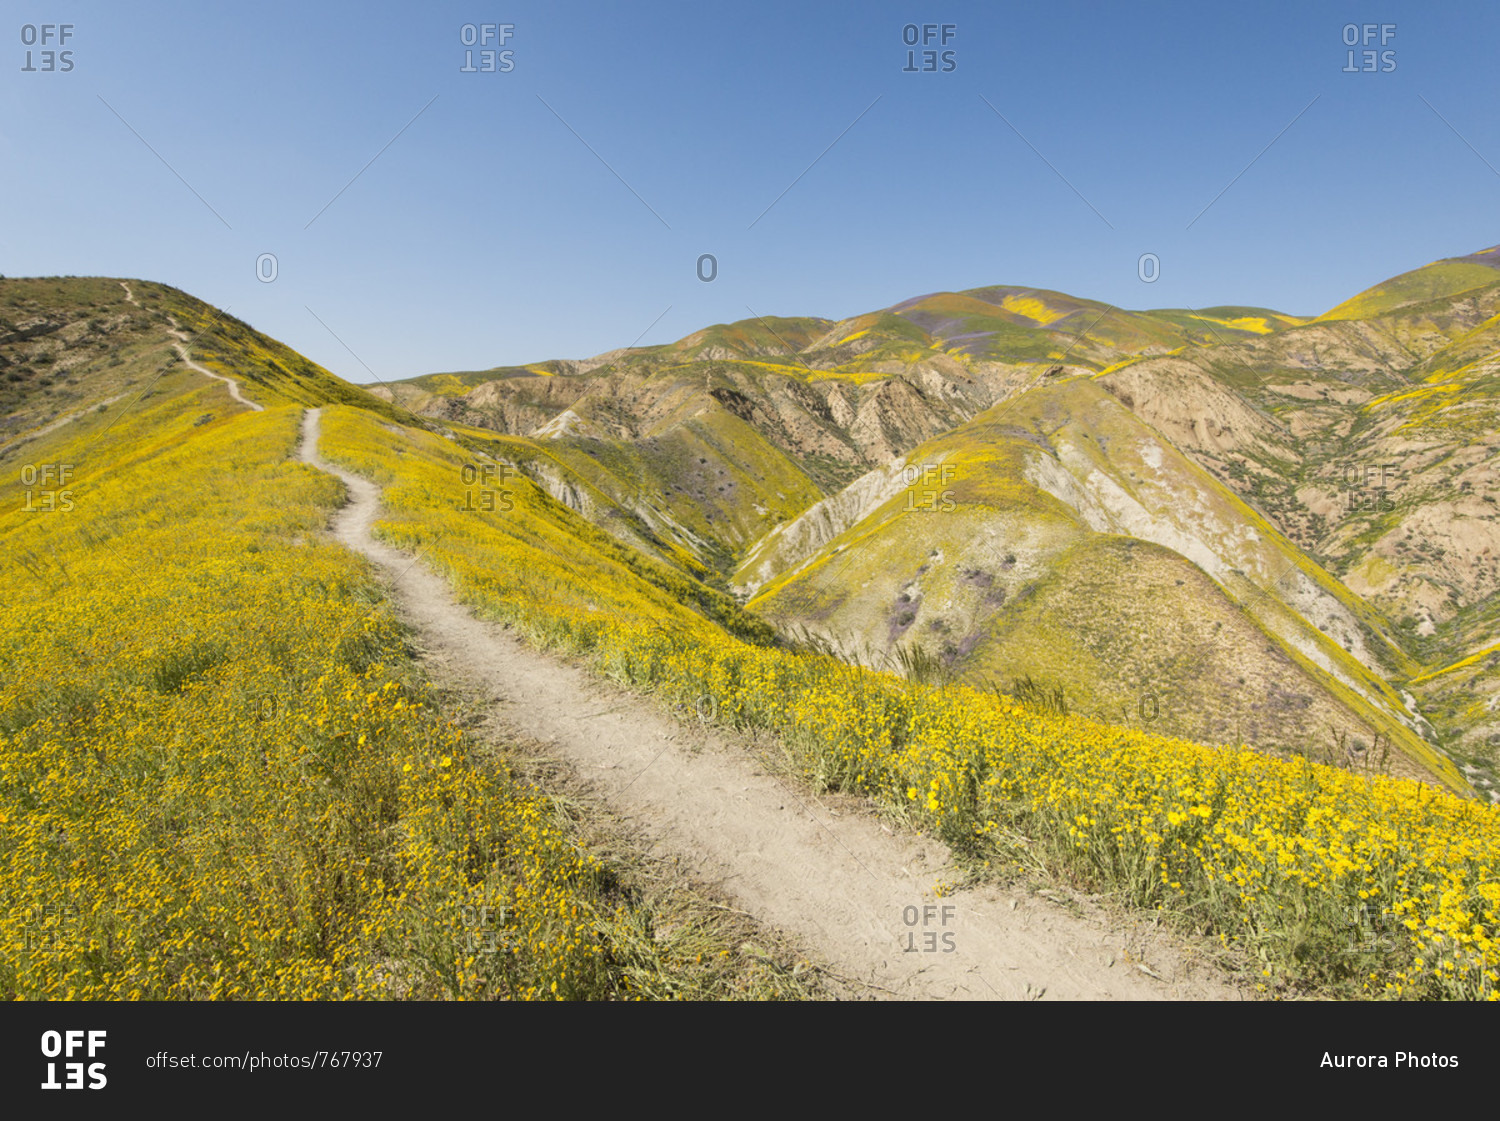 Scenic landscape with footpath on hill among yellow wildflowers,?Carrizo?Plain National Monument, California, USA